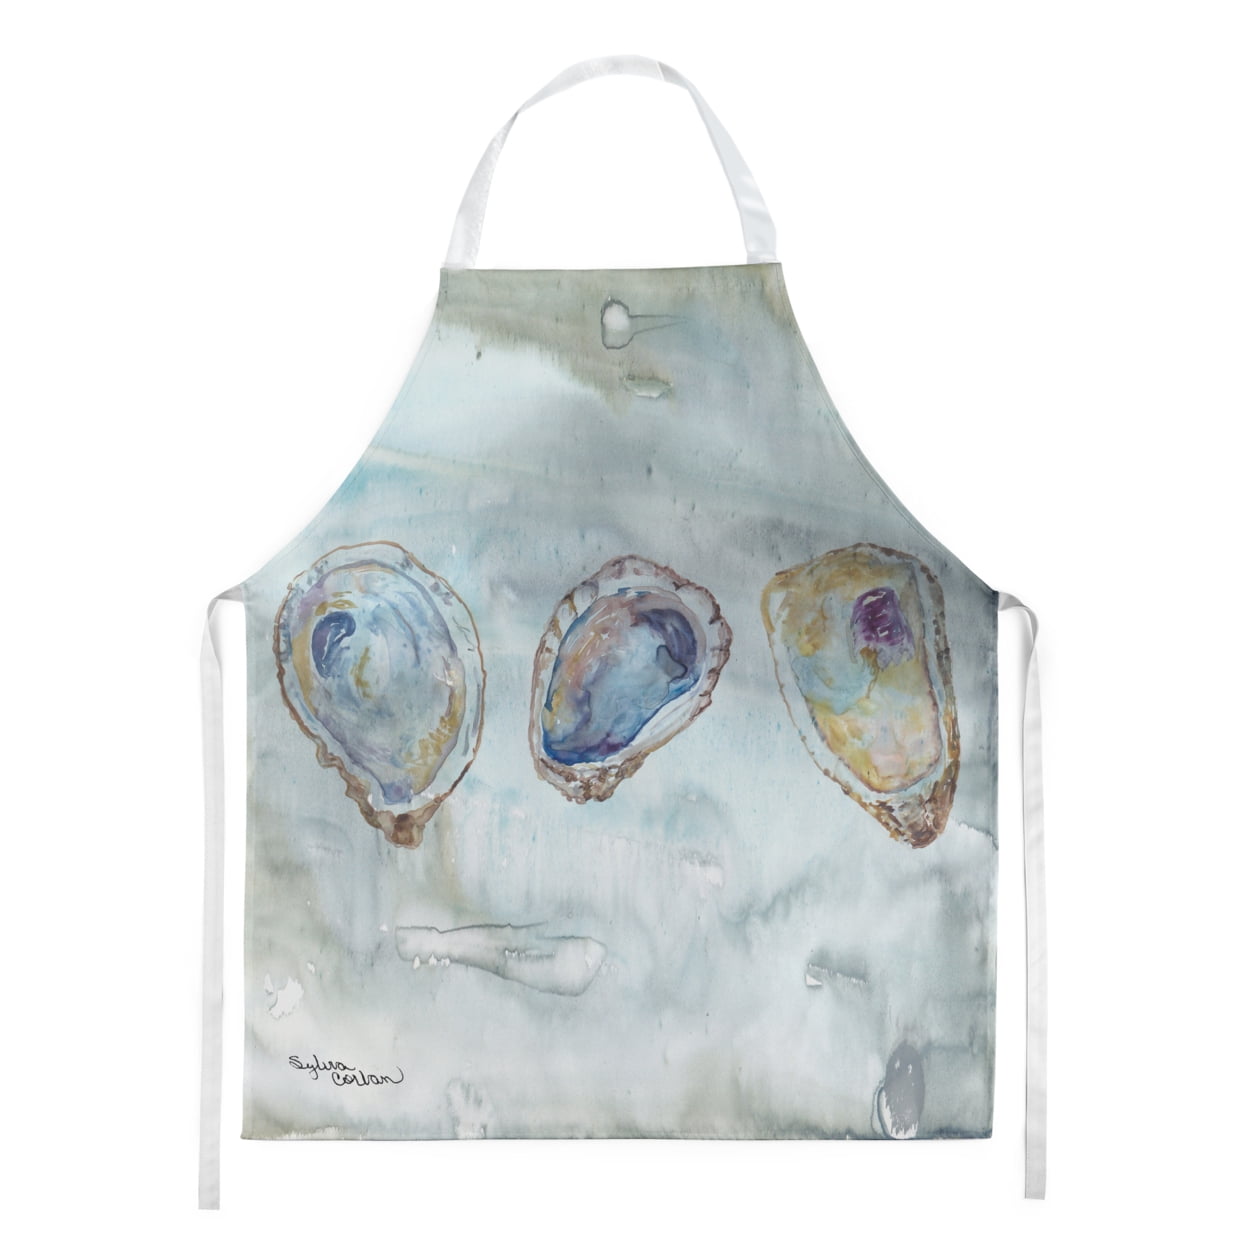 UPC 194030000007 product image for SC2001APRON Oysters Watercolor Apron | upcitemdb.com